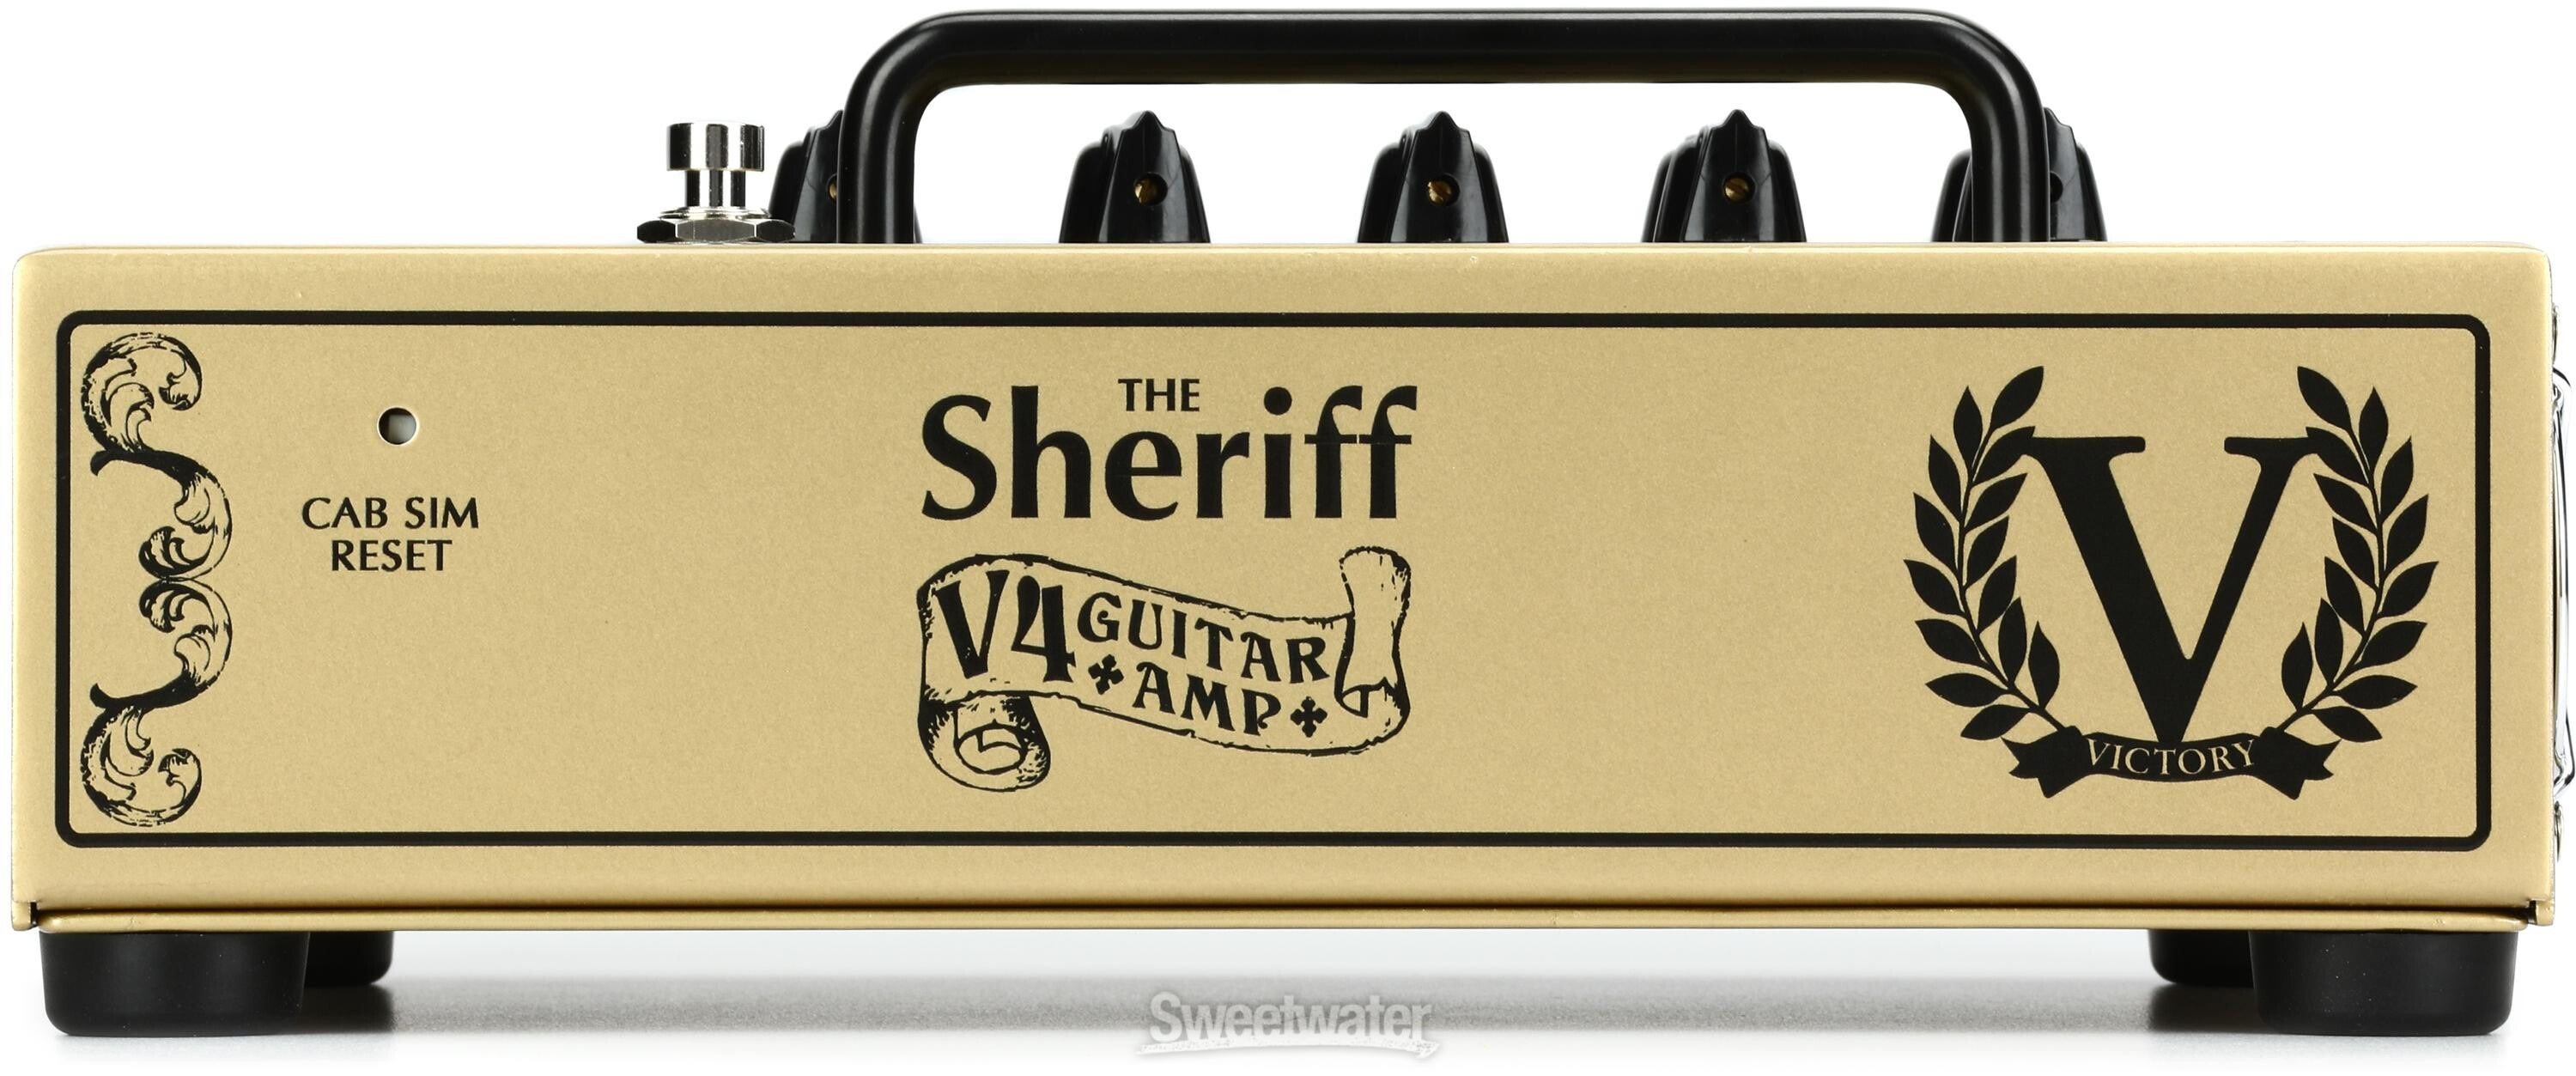 Victory Amplification V4 The Sheriff Hybrid Guitar Amplifier Pedal 